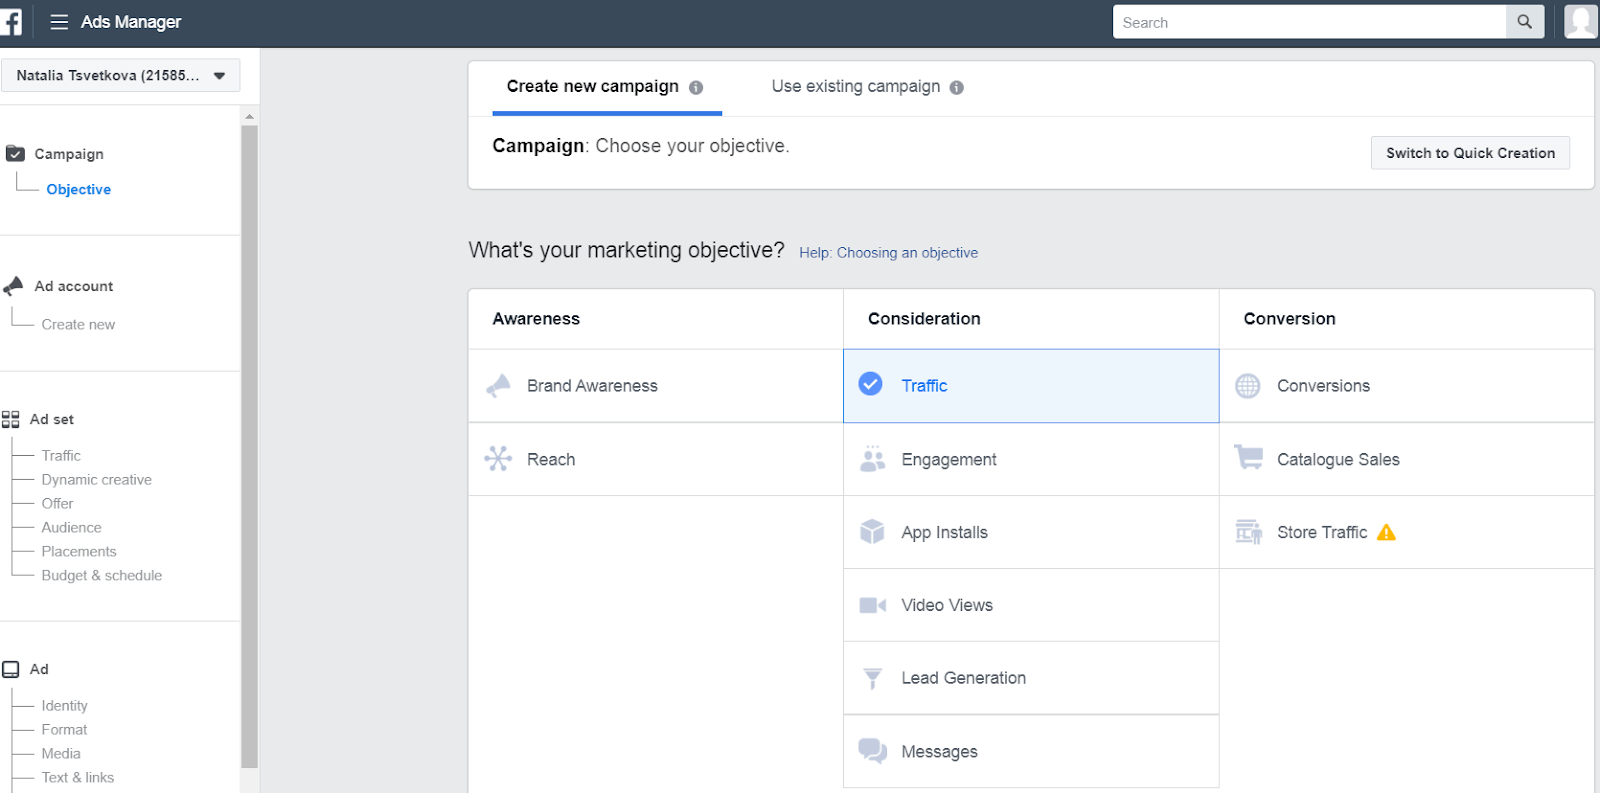 A screenshot of the Facebook Ad Manager dashboard displaying marketing objectives